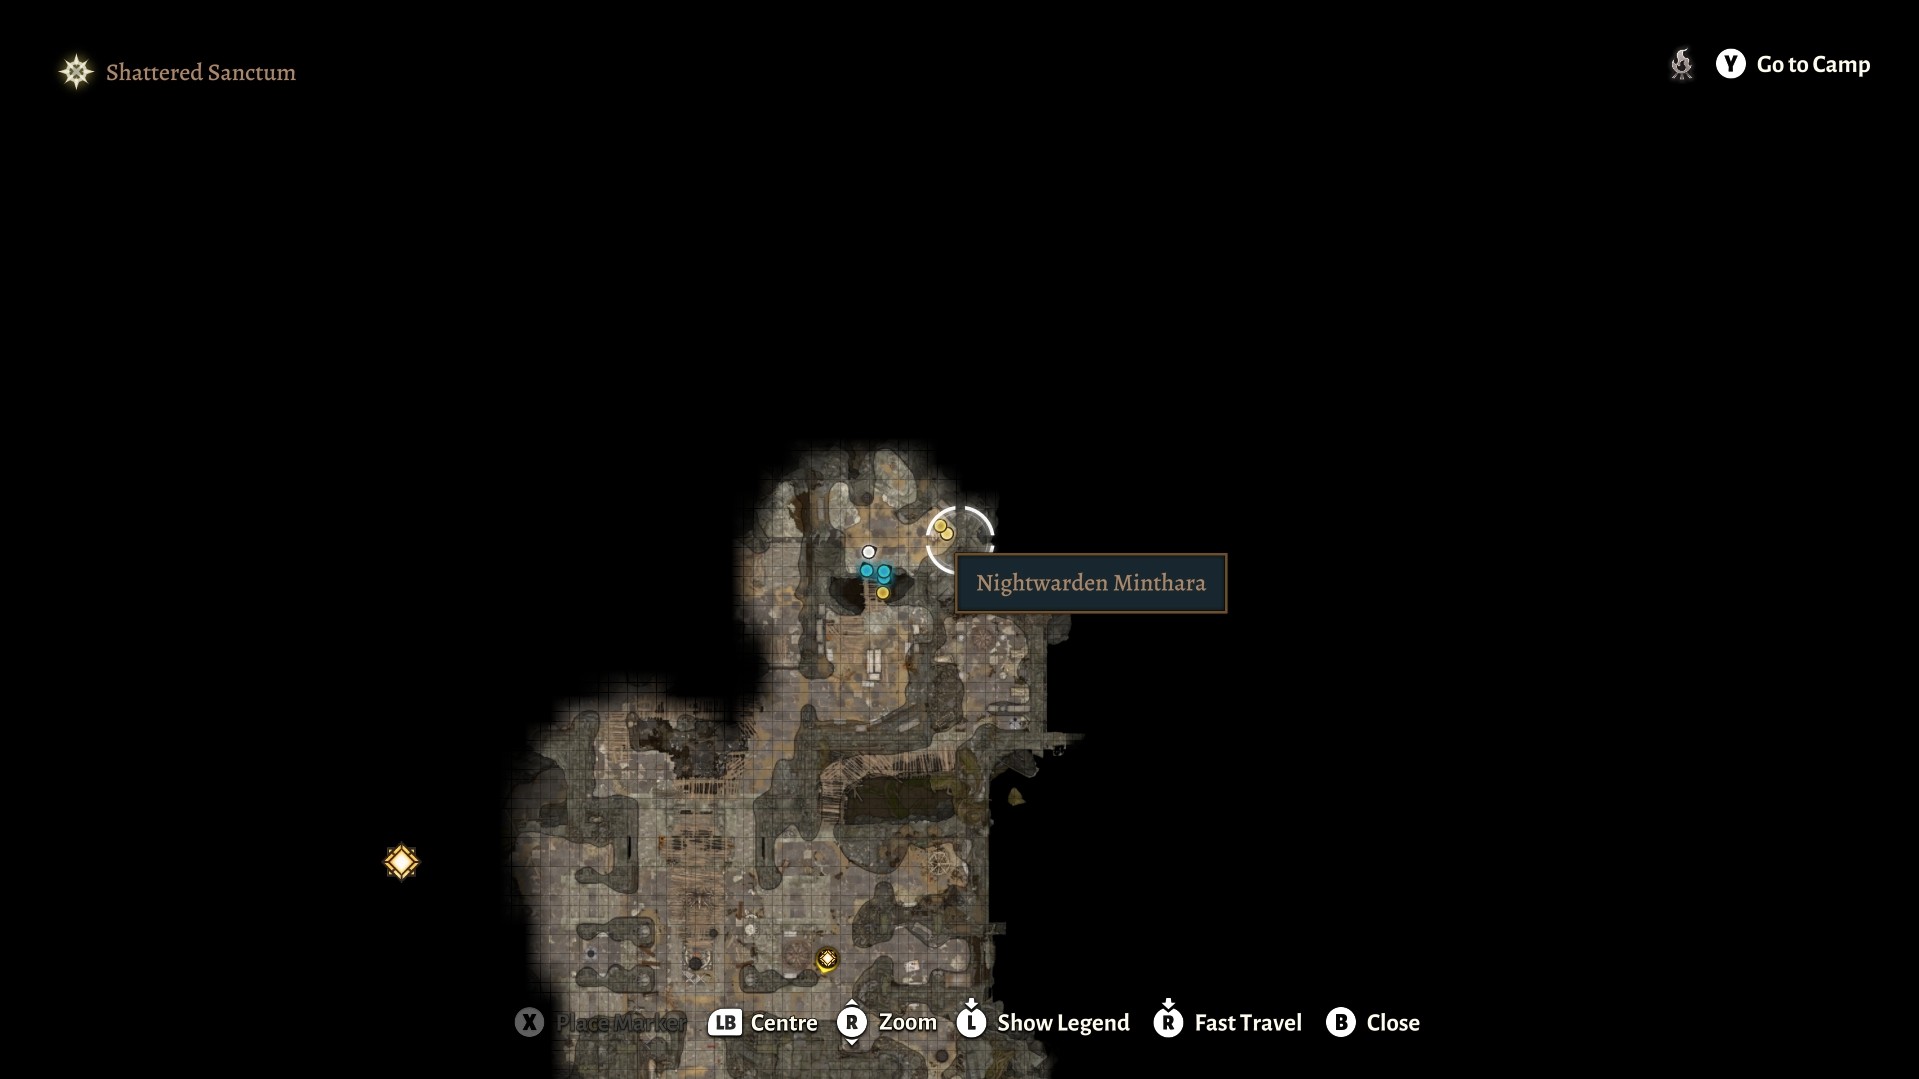 Minthara location on the Shattered Sanctum map in BG3